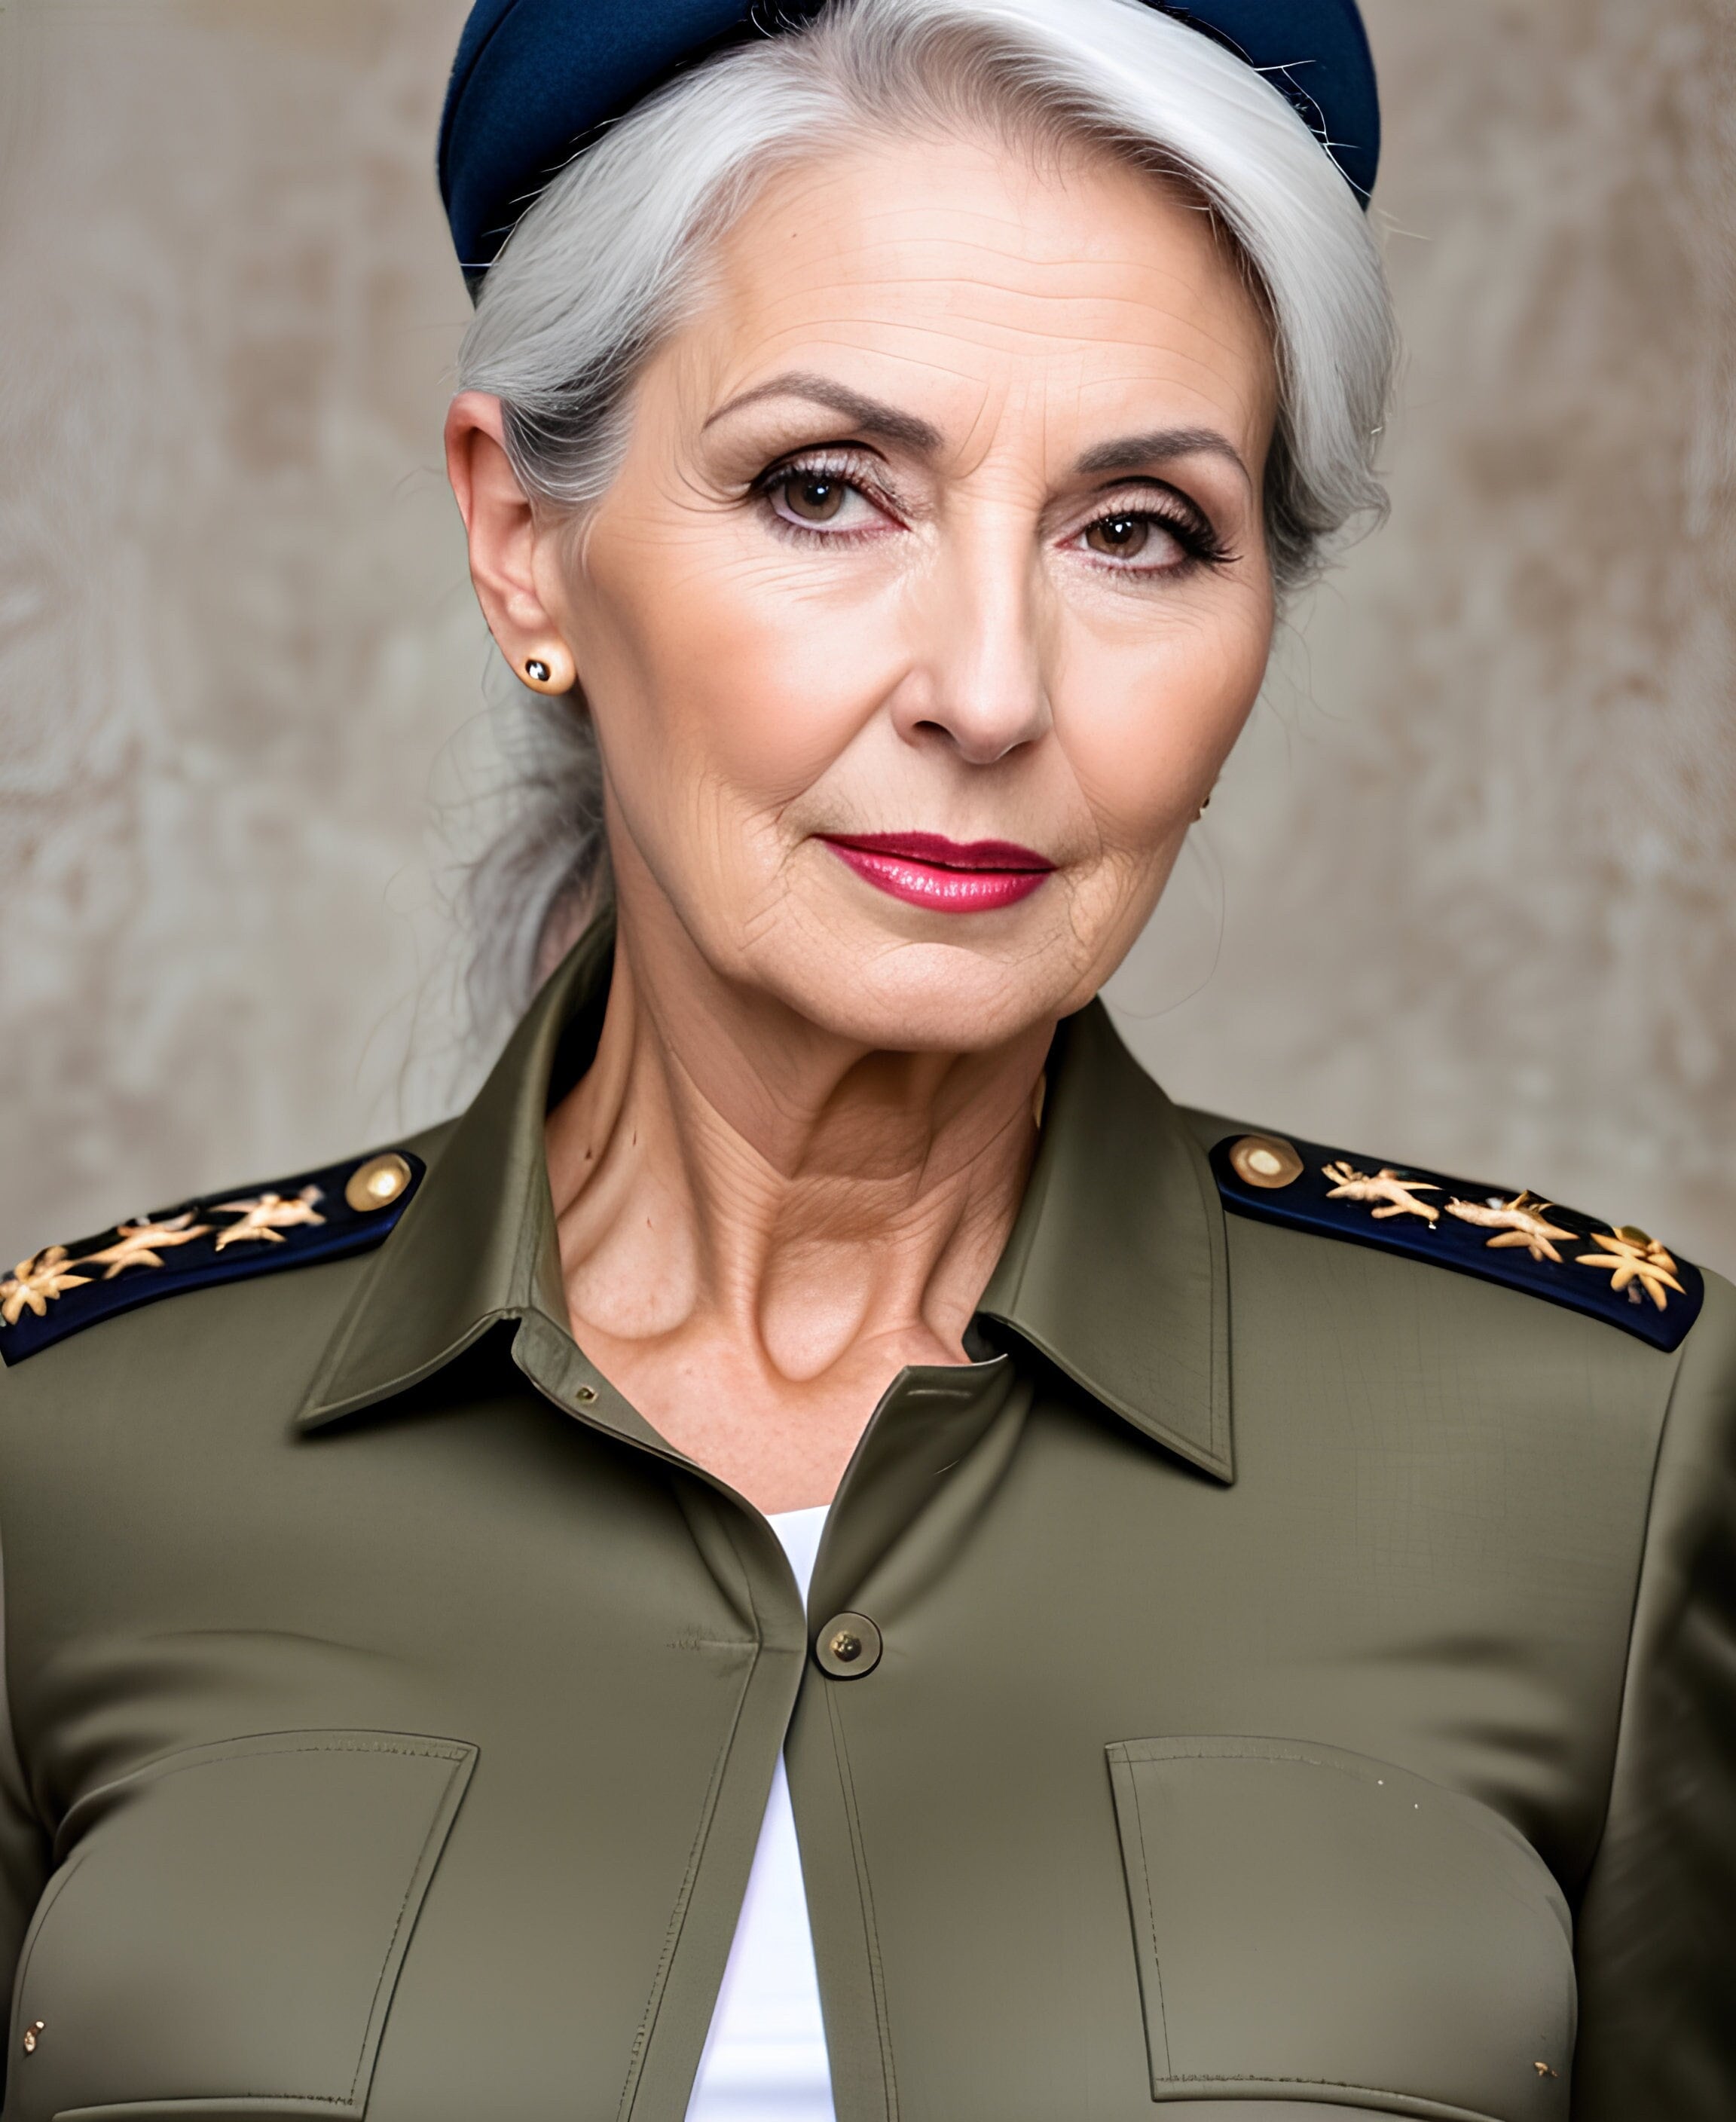 Erotic Army Milf Photography Captivating Illustrations Of Mature Women Over 50 Military Women